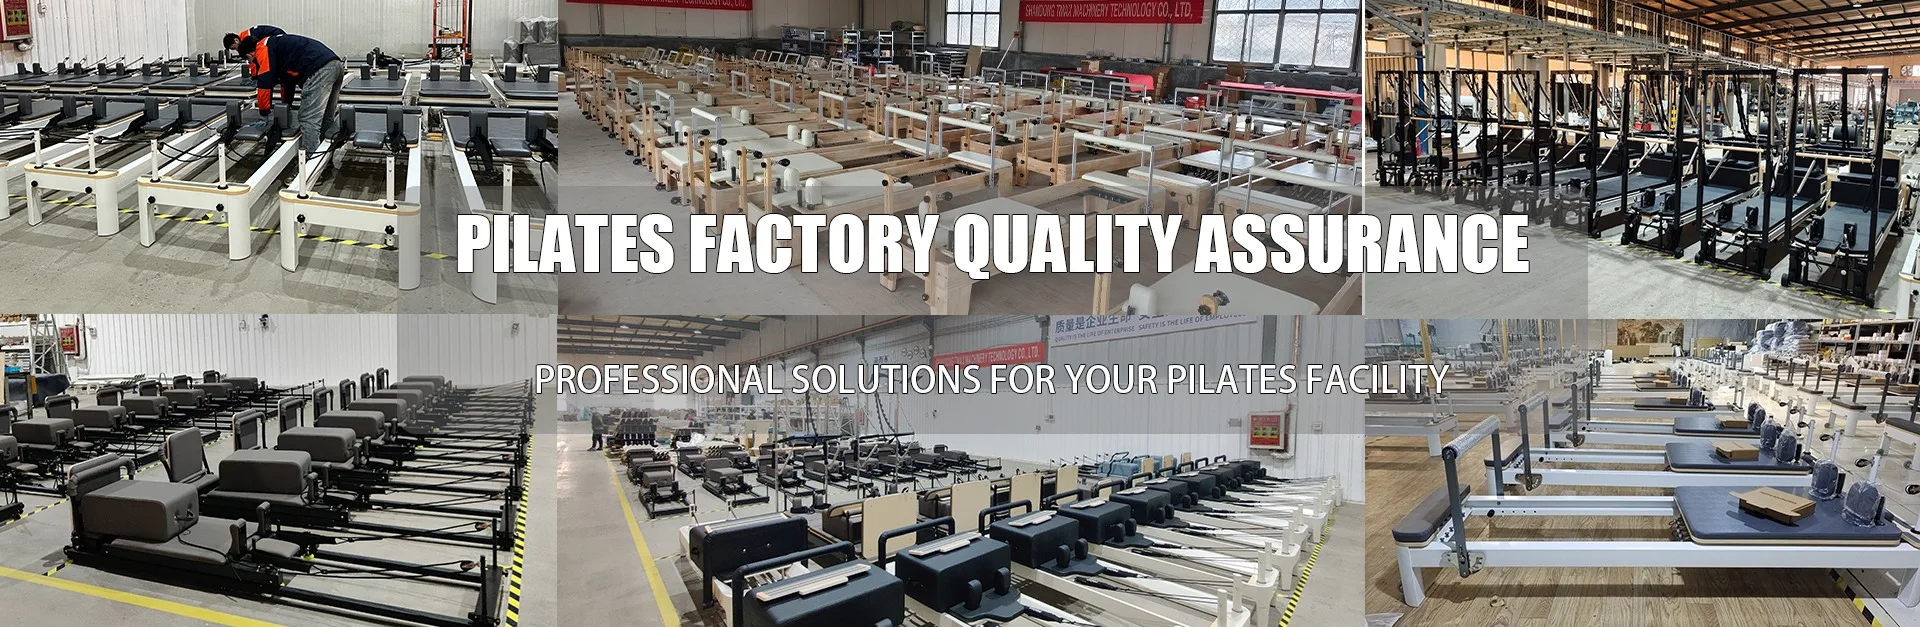 Professional solutions for your Pilates facility